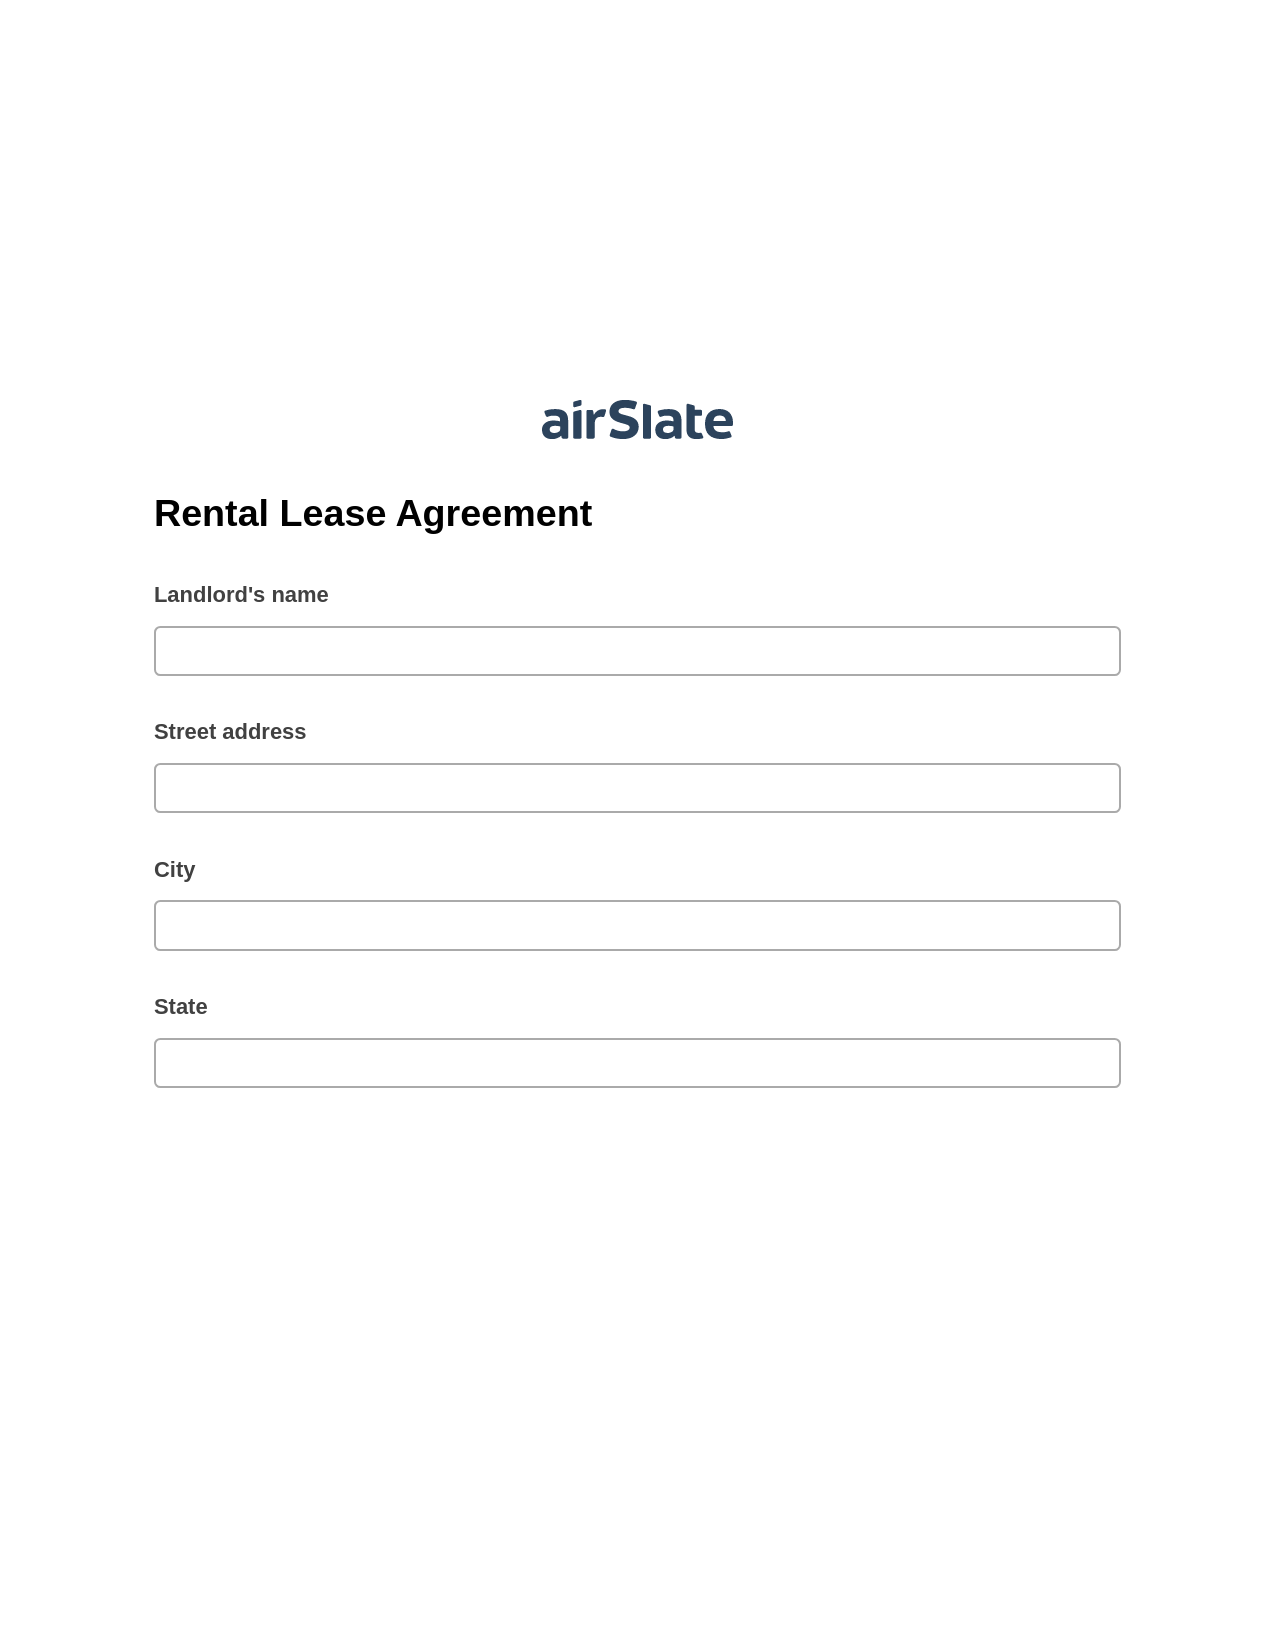 Rental Lease Agreement Pre-fill from Google Sheets Bot, Update MS Dynamics 365 Record Bot, Slack Two-Way Binding Bot